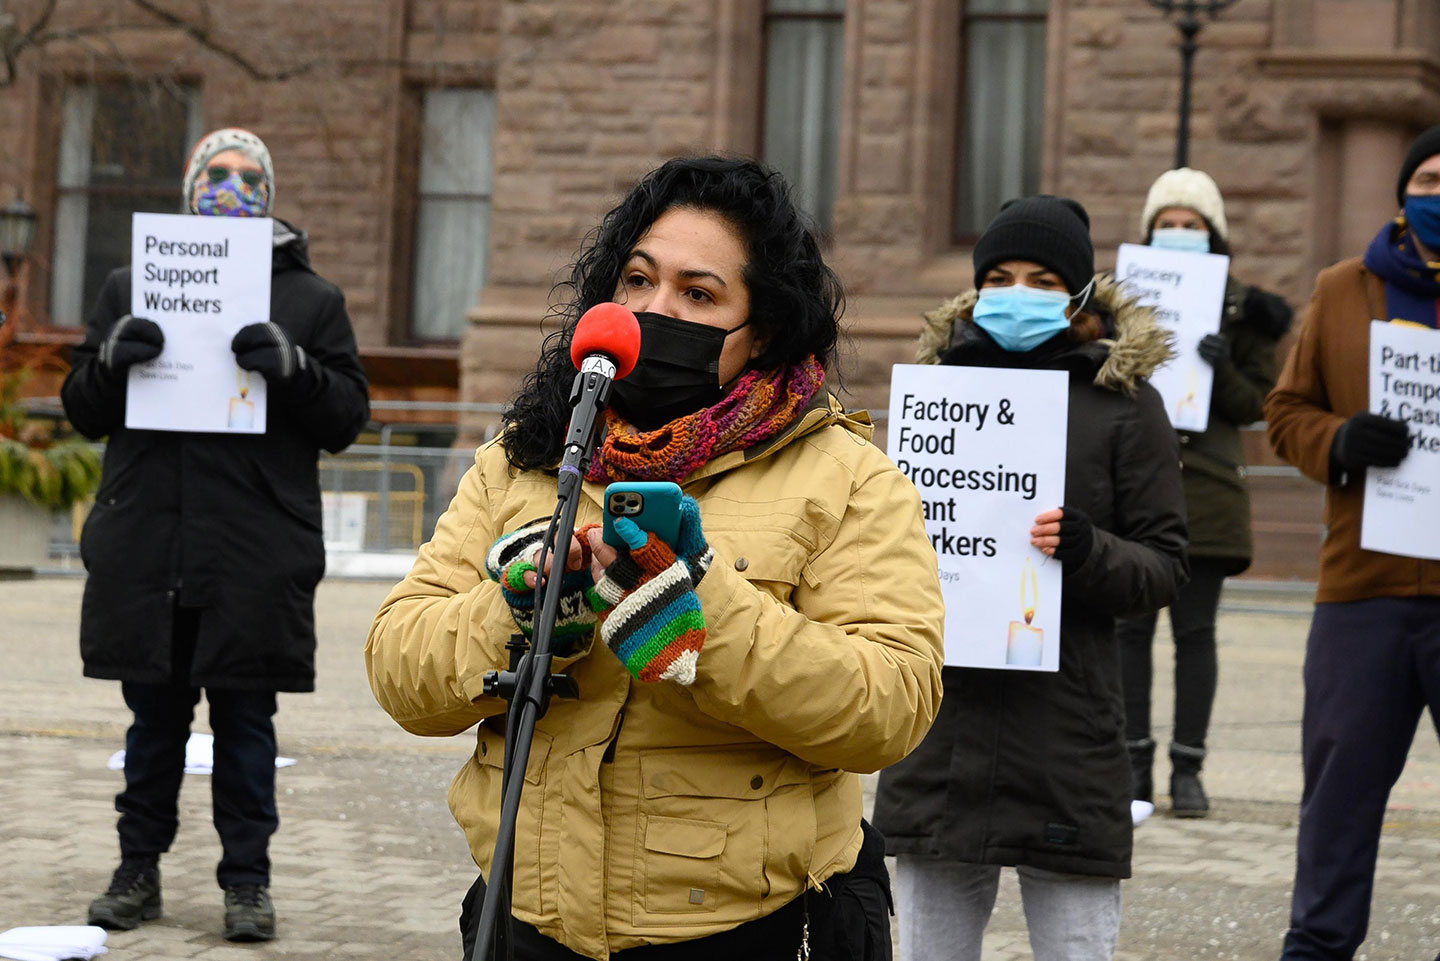 Veronica Zaragoza, an organizer with the Workers’ Action Centre, speaking on the need for permanent paid sick days outside Queen's Park. Photo: Jared Ong